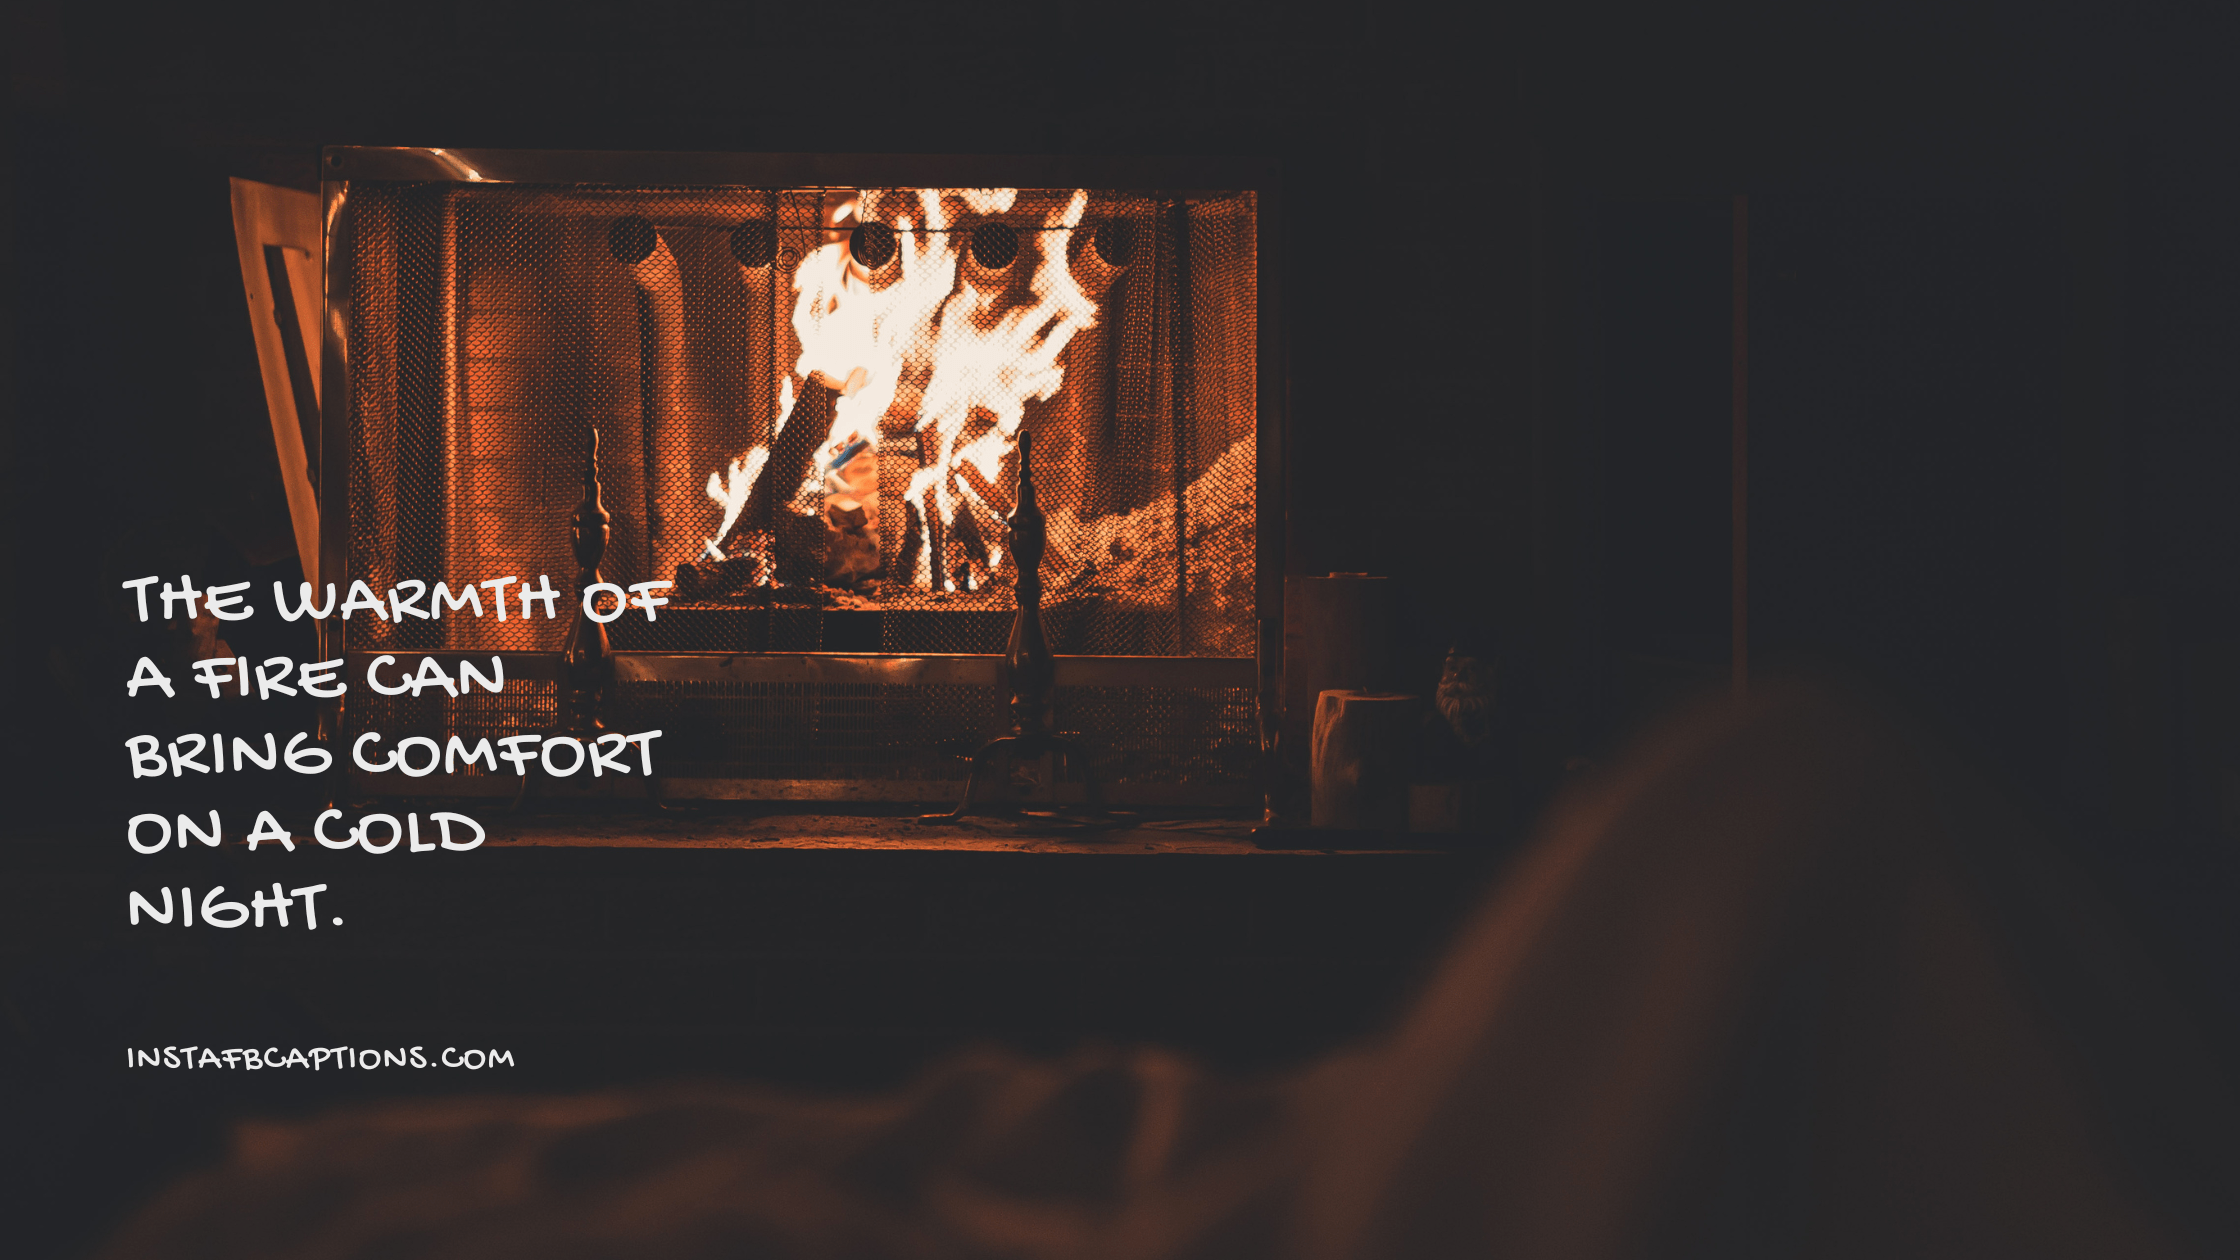 The warmth of a fire can bring comfort on a cold night. fire instagram captions - 2022 Fire Instagram Captions - 95 Fire Captions &amp; Quotes For Instagram Posts in 2022